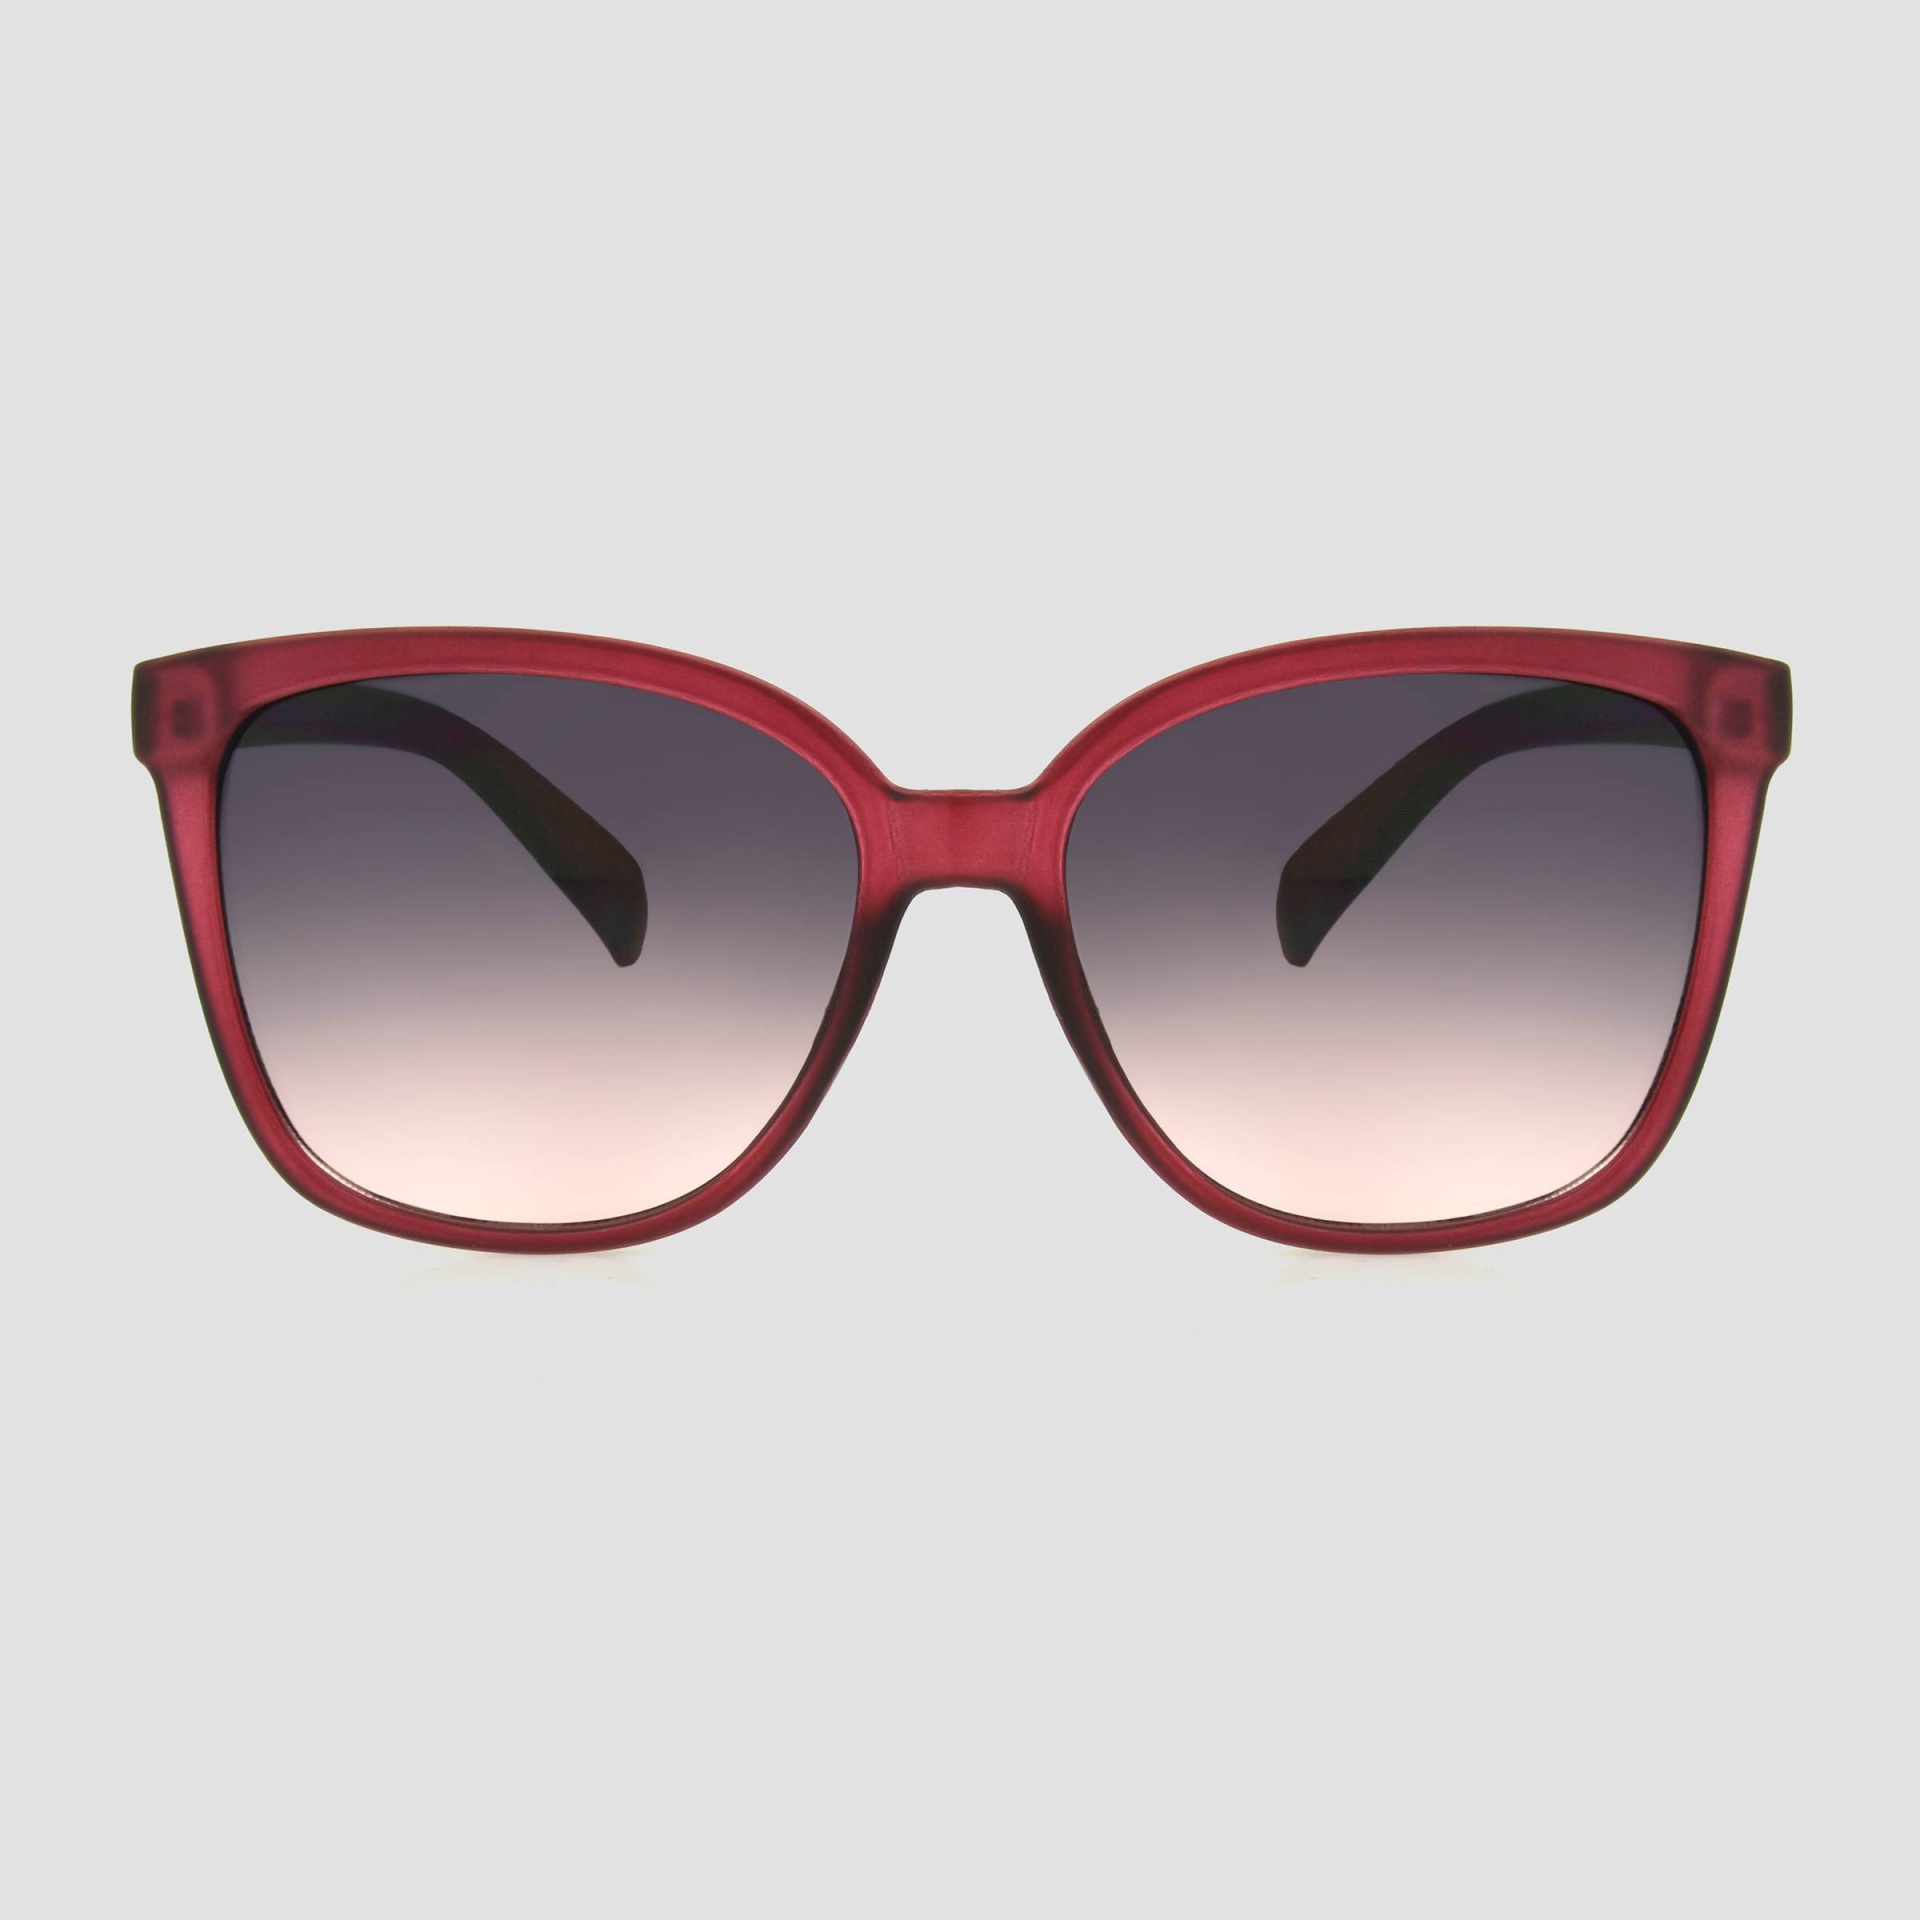 slide 1 of 2, Women's Crystal Square Plastic Sunglasses - A New Day Burgundy, 1 ct